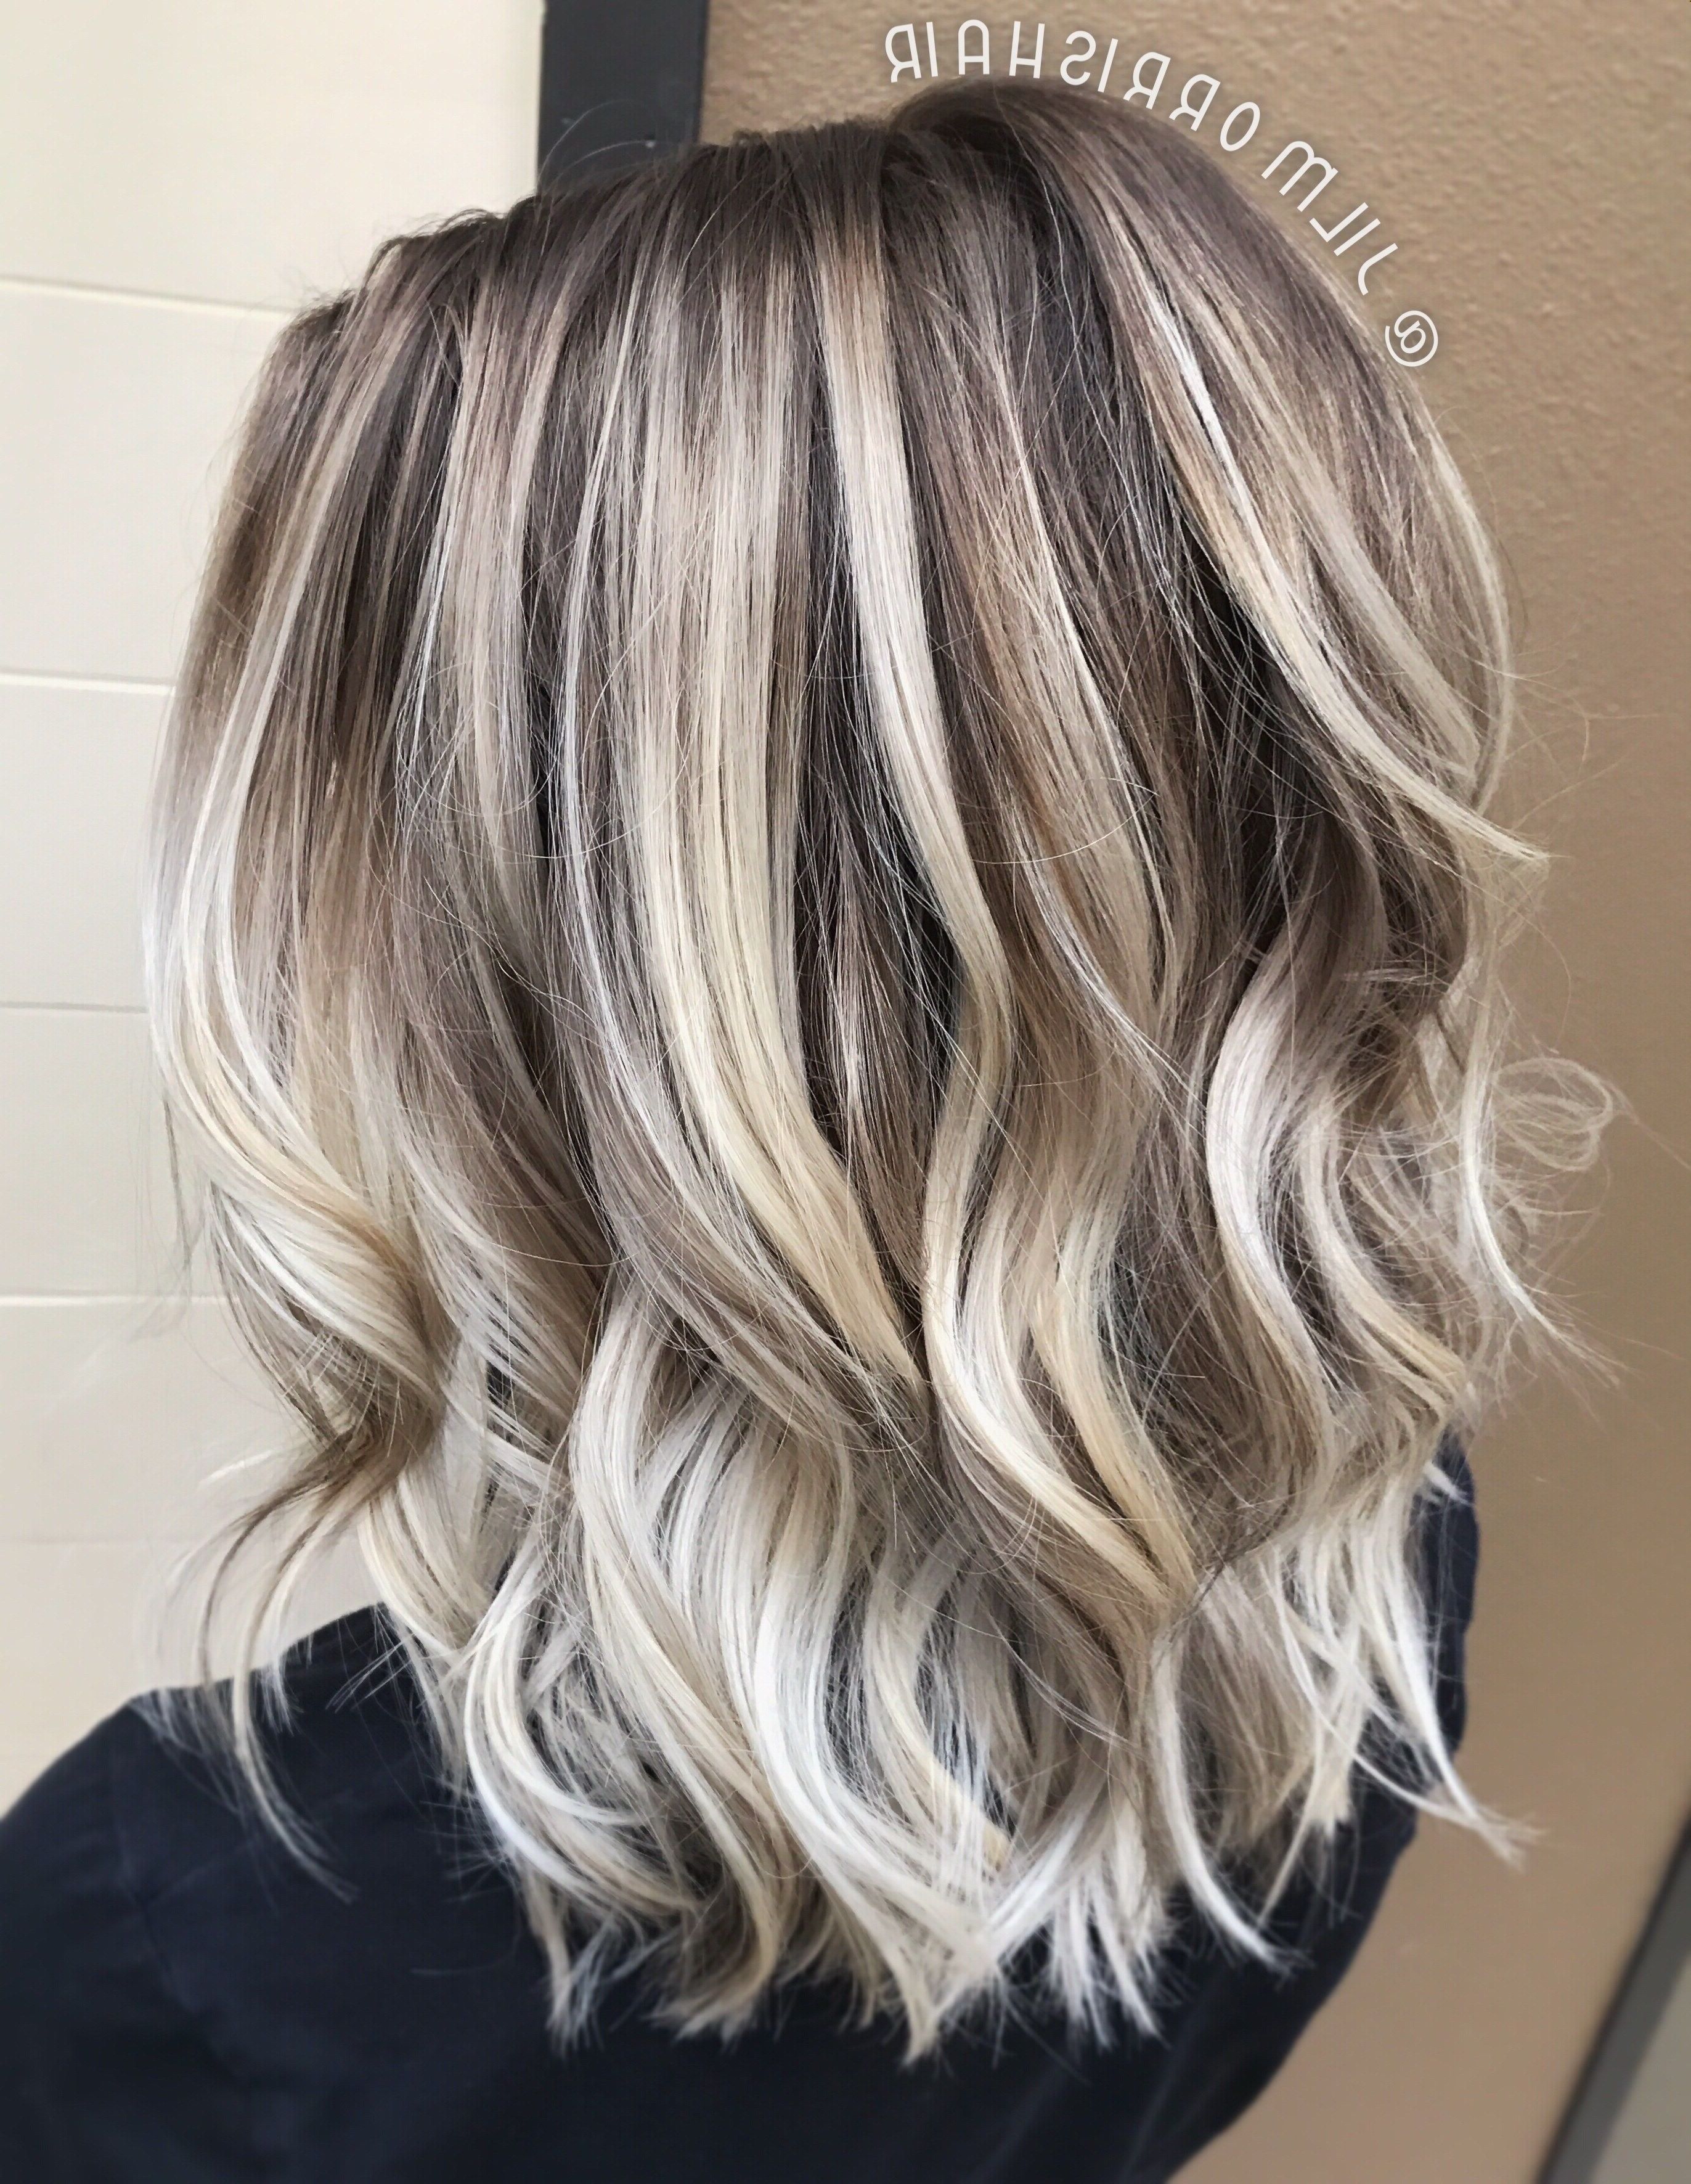 Hair Highlights – Cool Icy Ashy Blonde Balayage Highlights, Shadow With Recent Ashy Blonde Pixie Haircuts With A Messy Touch (View 10 of 15)